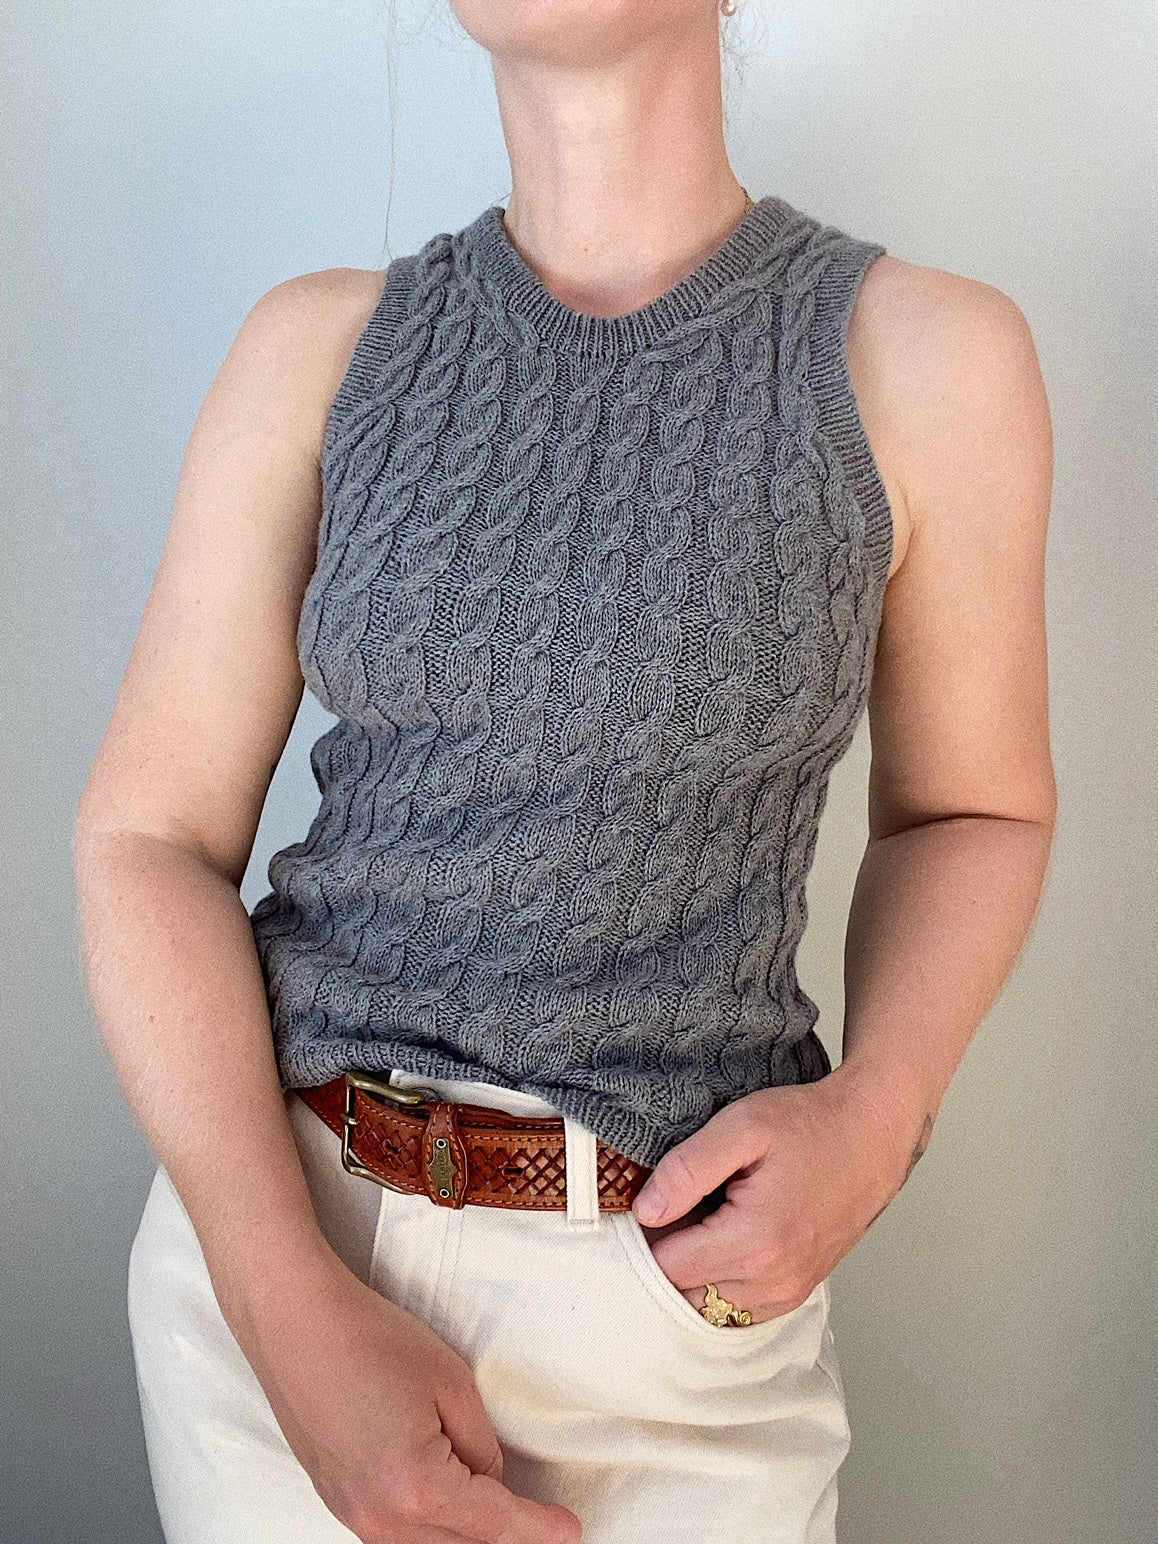 Camisole No. 8 - Knitting Pattern in English – • MY FAVOURITE THINGS •  KNITWEAR